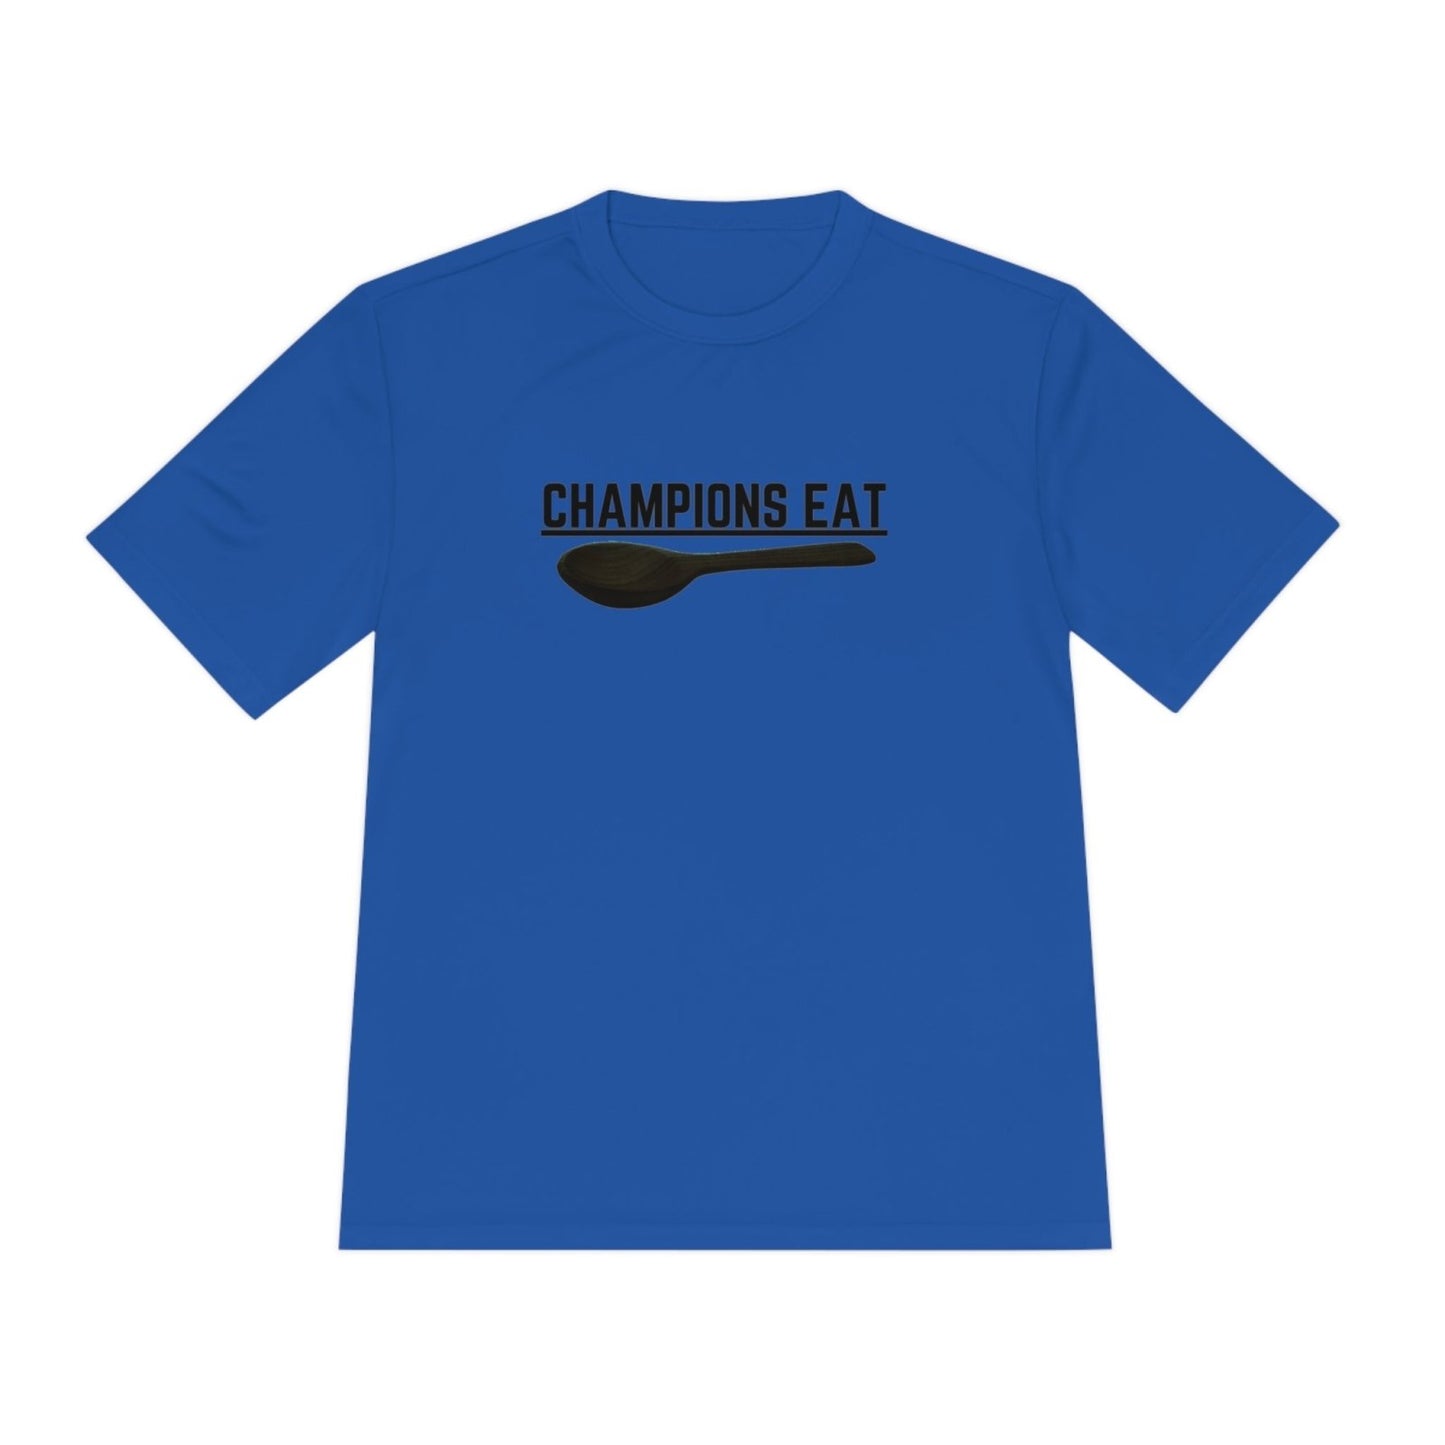 Stay Cool and Dry with our "Champion's Eat" Workout T-Shirt - Quick Dry Technology - Selden & Kingsley